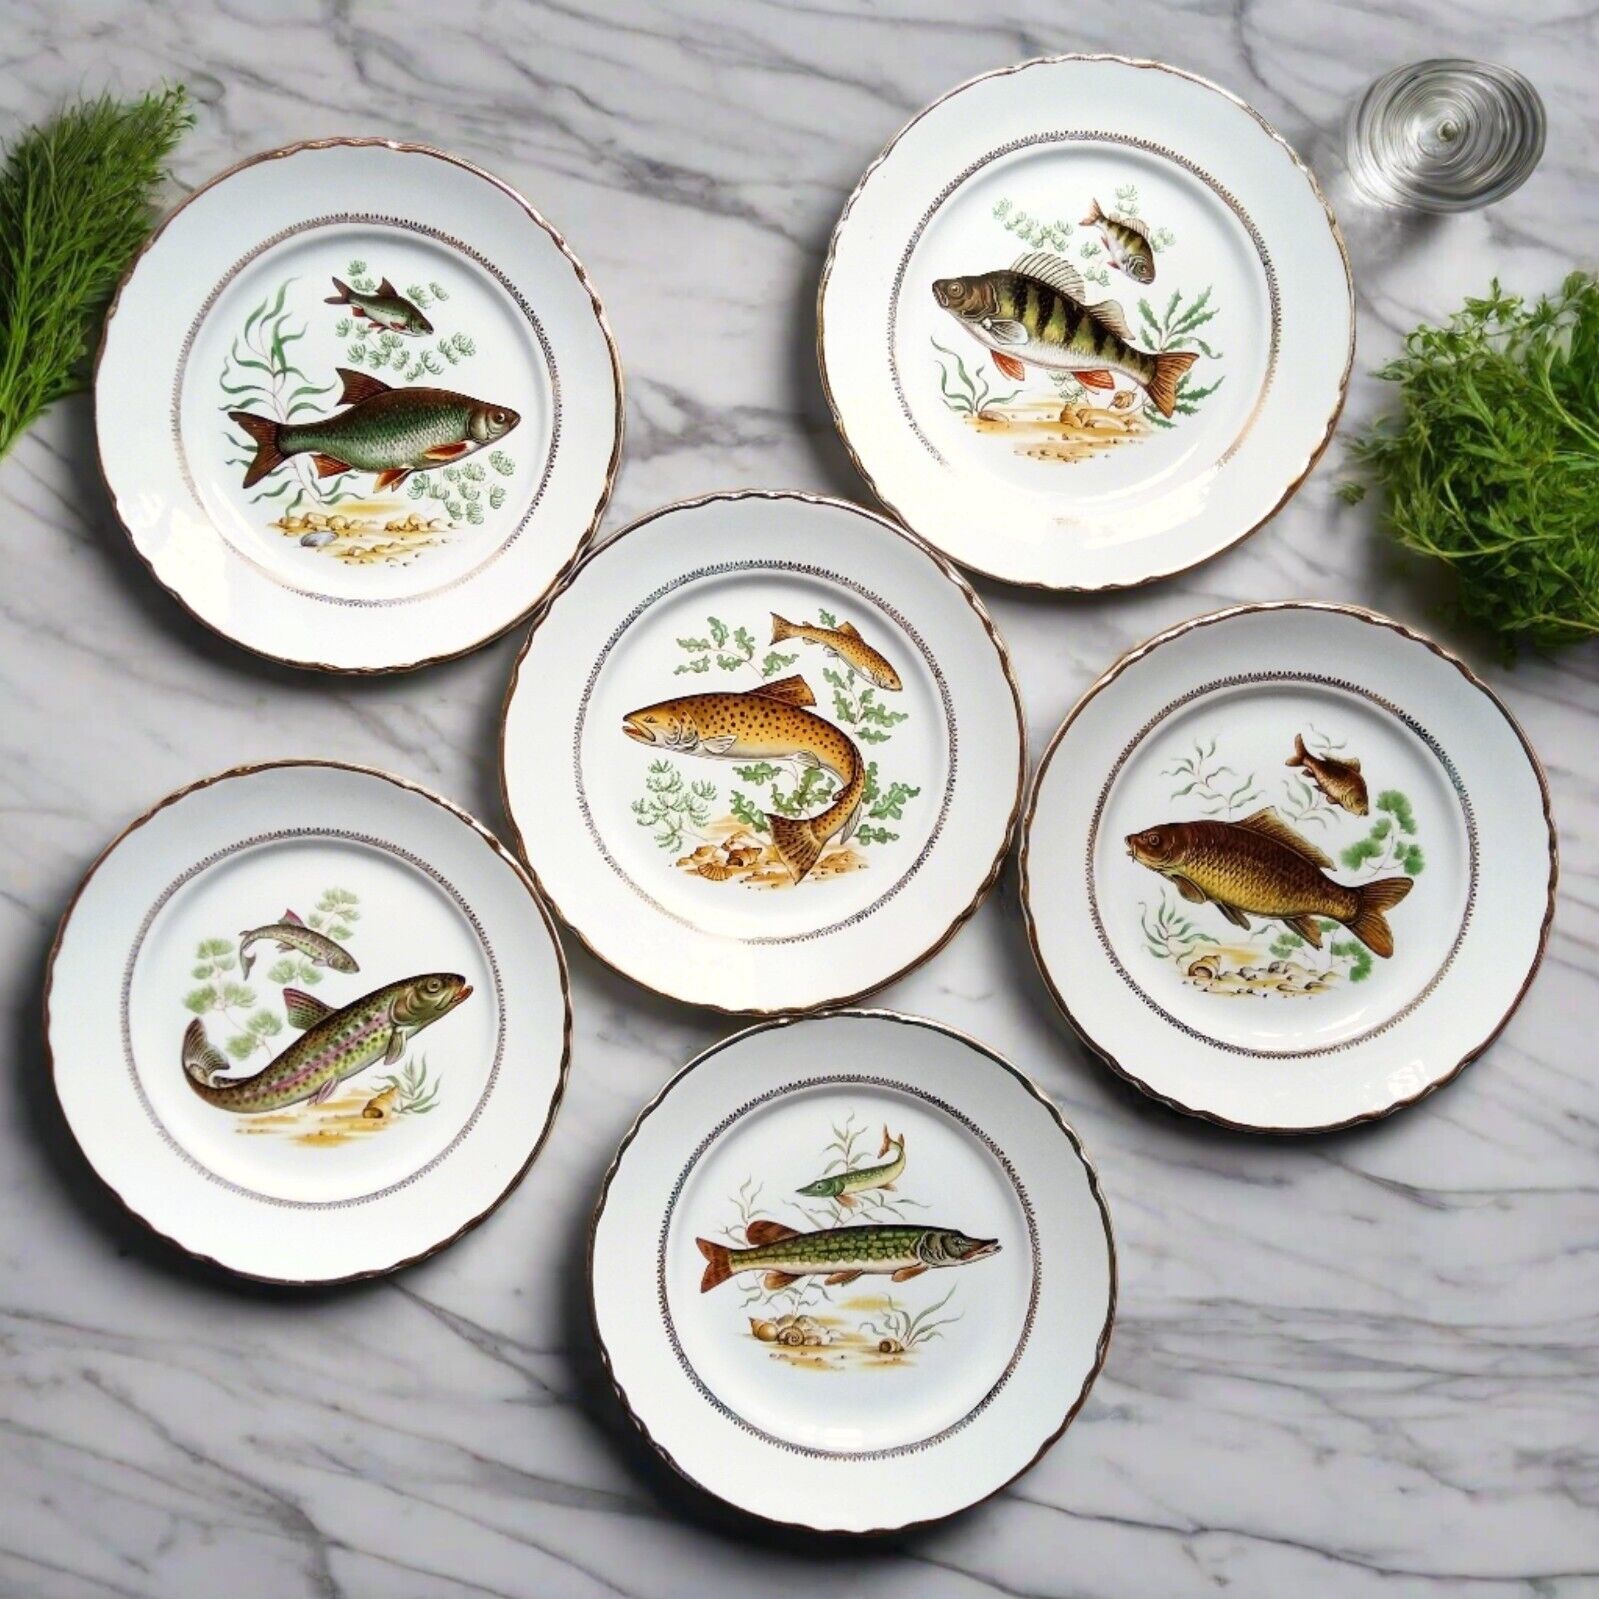 Six Vintage Fish Plates by Moulin des Loups. French Fish Dinnerware Set.